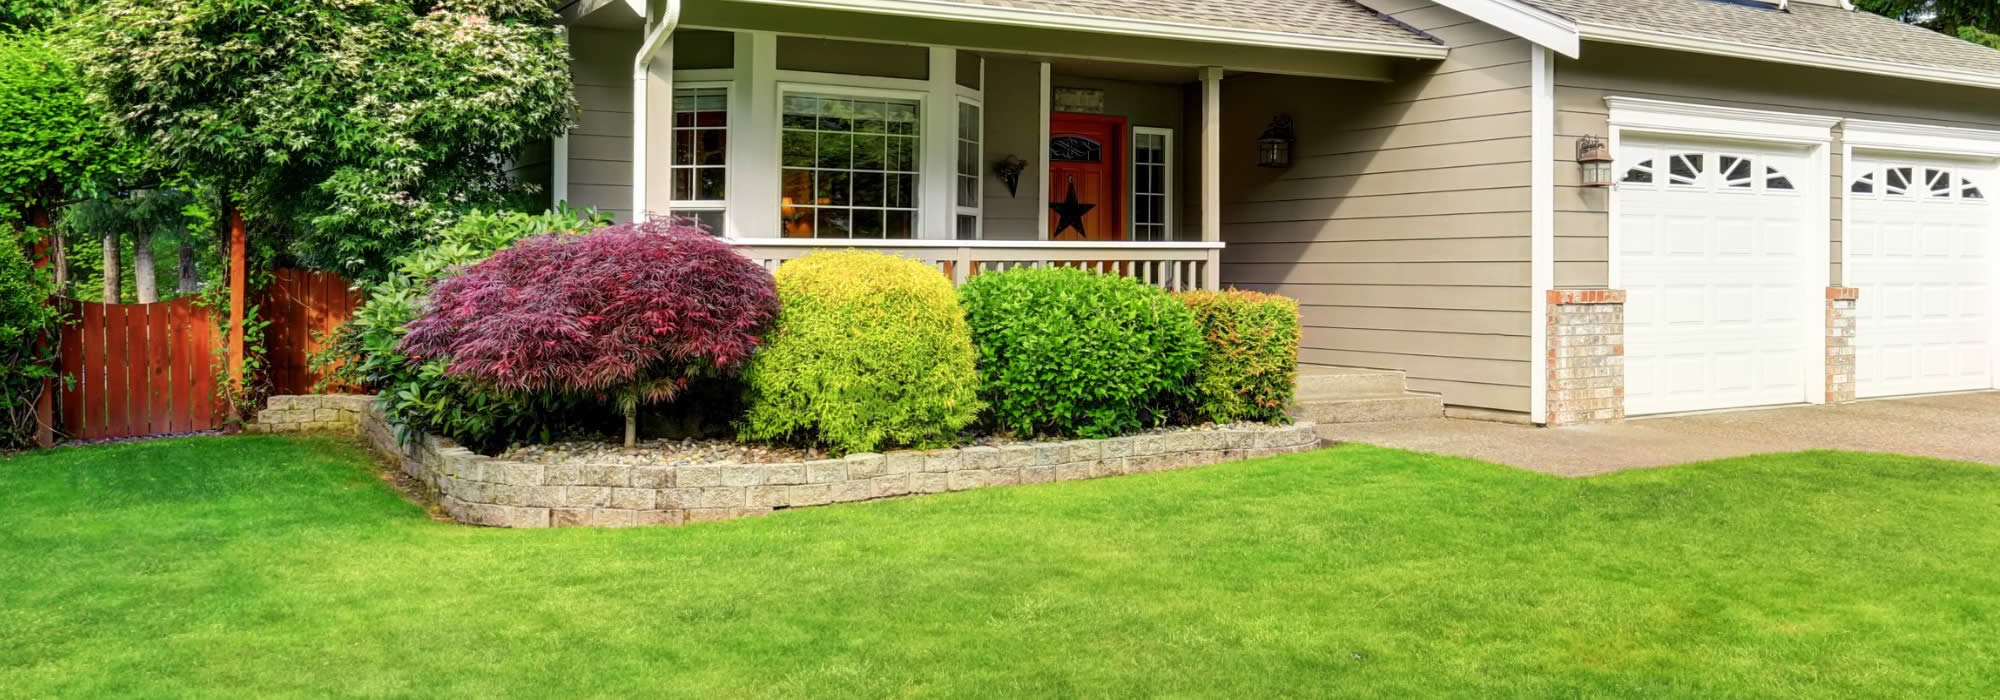 Landscaping Services in Cambridge